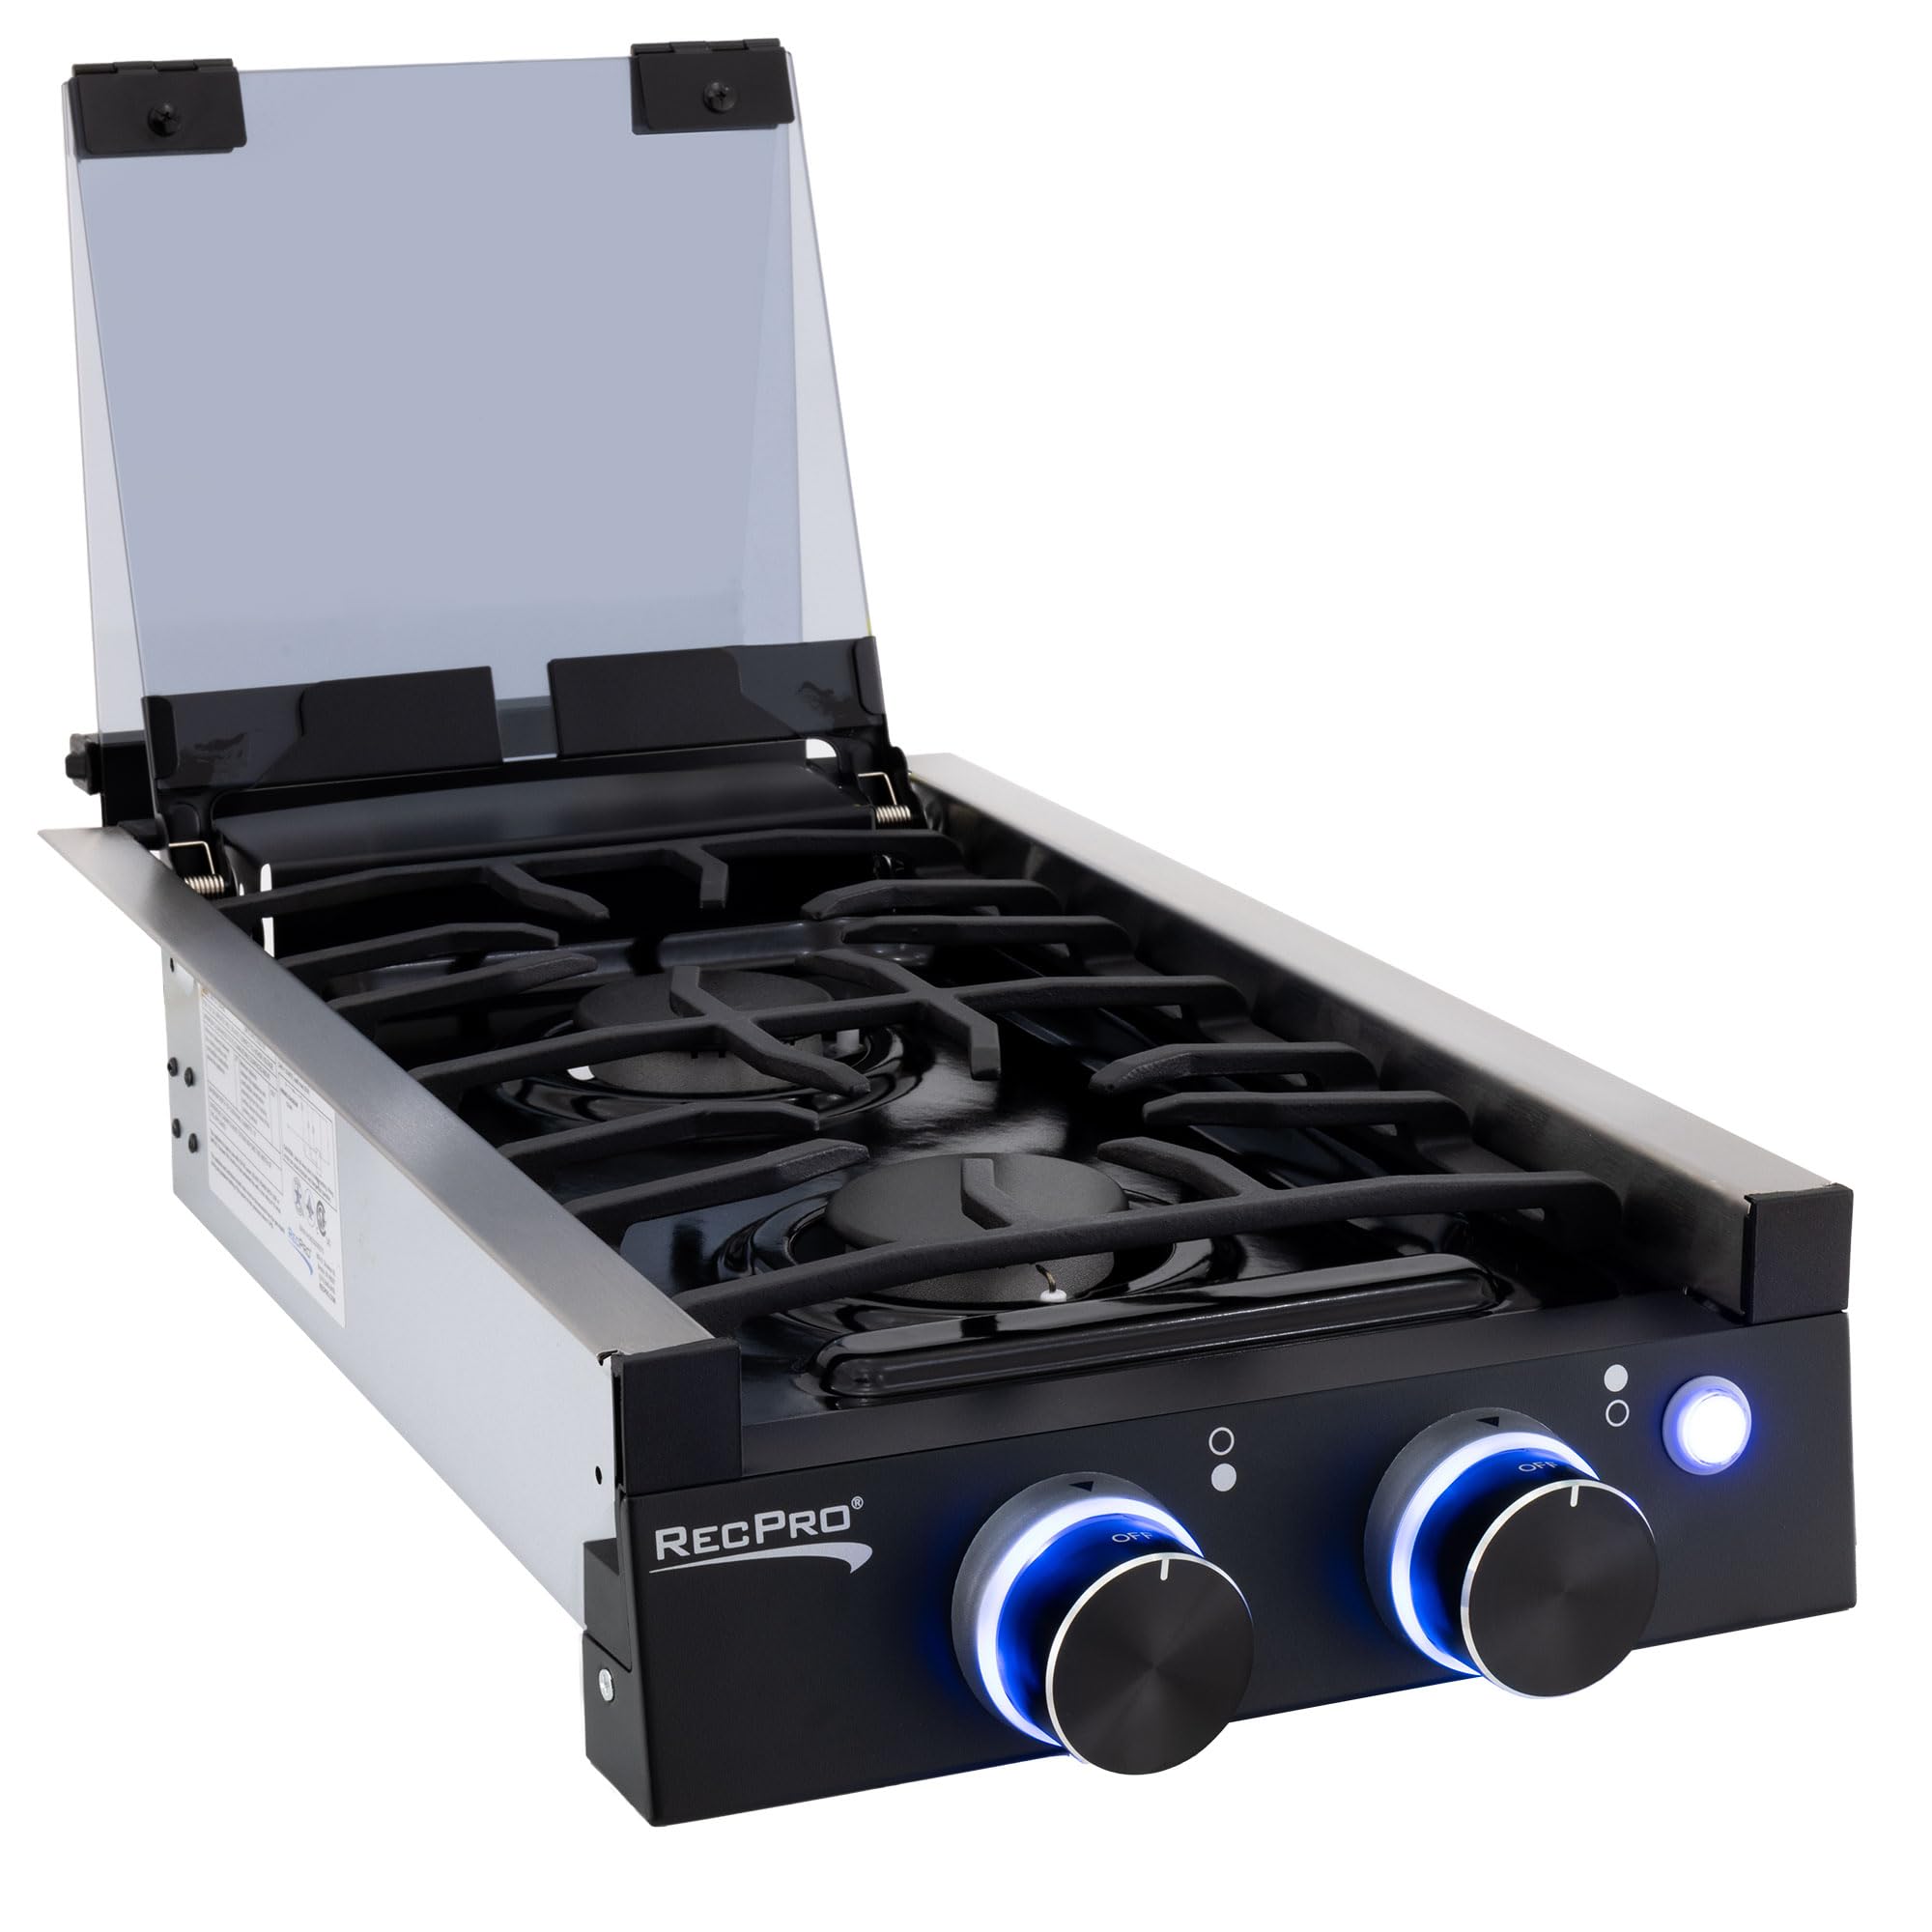 RecPro RV Built In Gas Cooktop